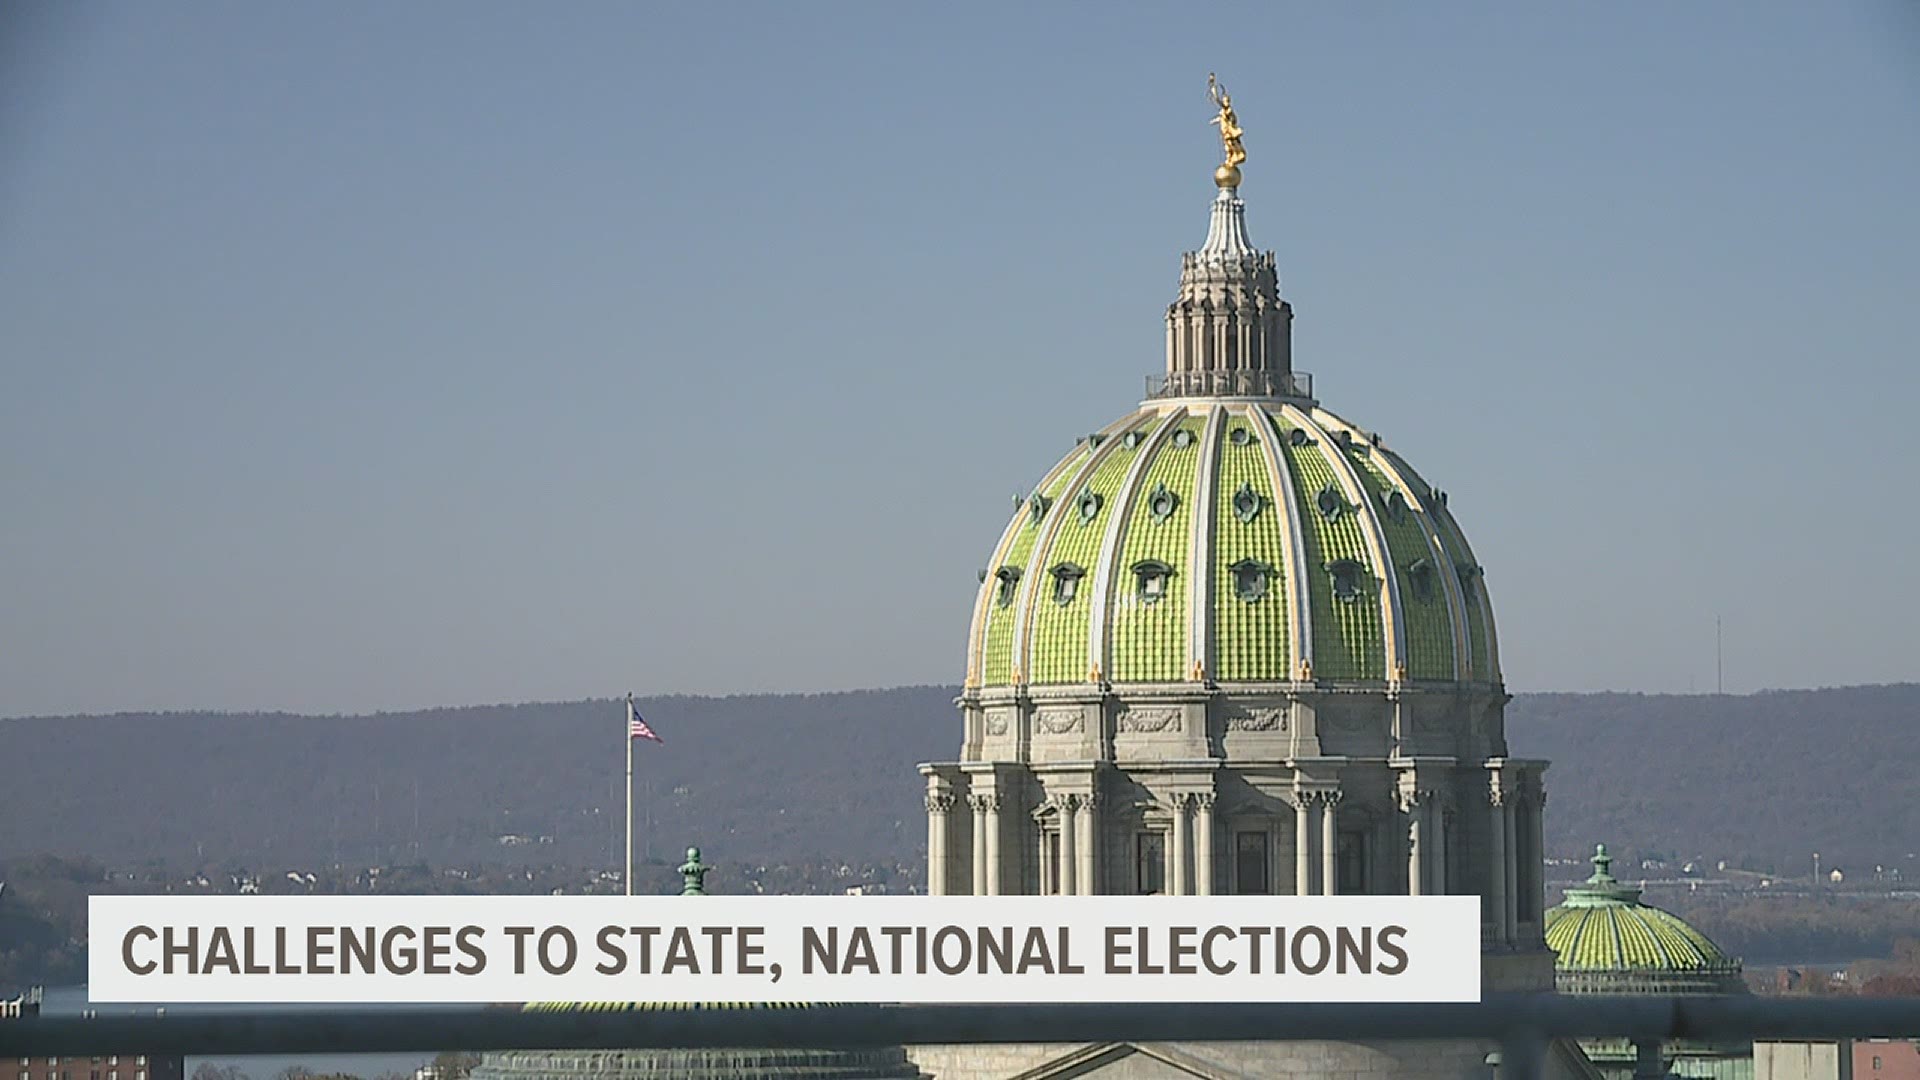 Though the votes are all counted, elections are apparently far from over. State legislators are challenging multiple state and national election results.